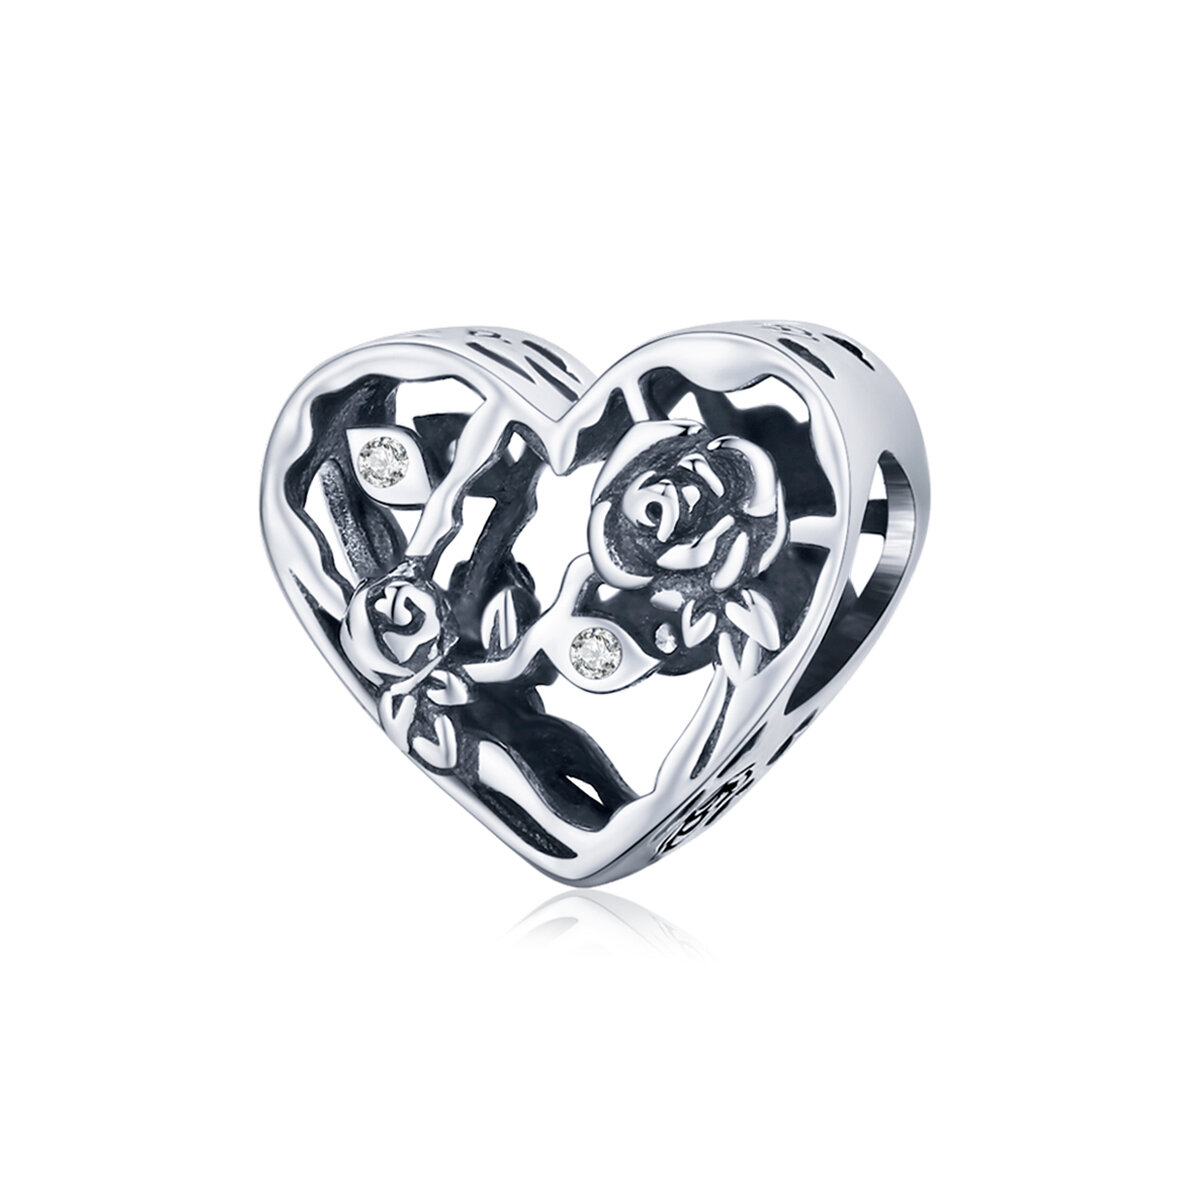 GemKing BSC475 Rose love S925 Sterling Silver Charm